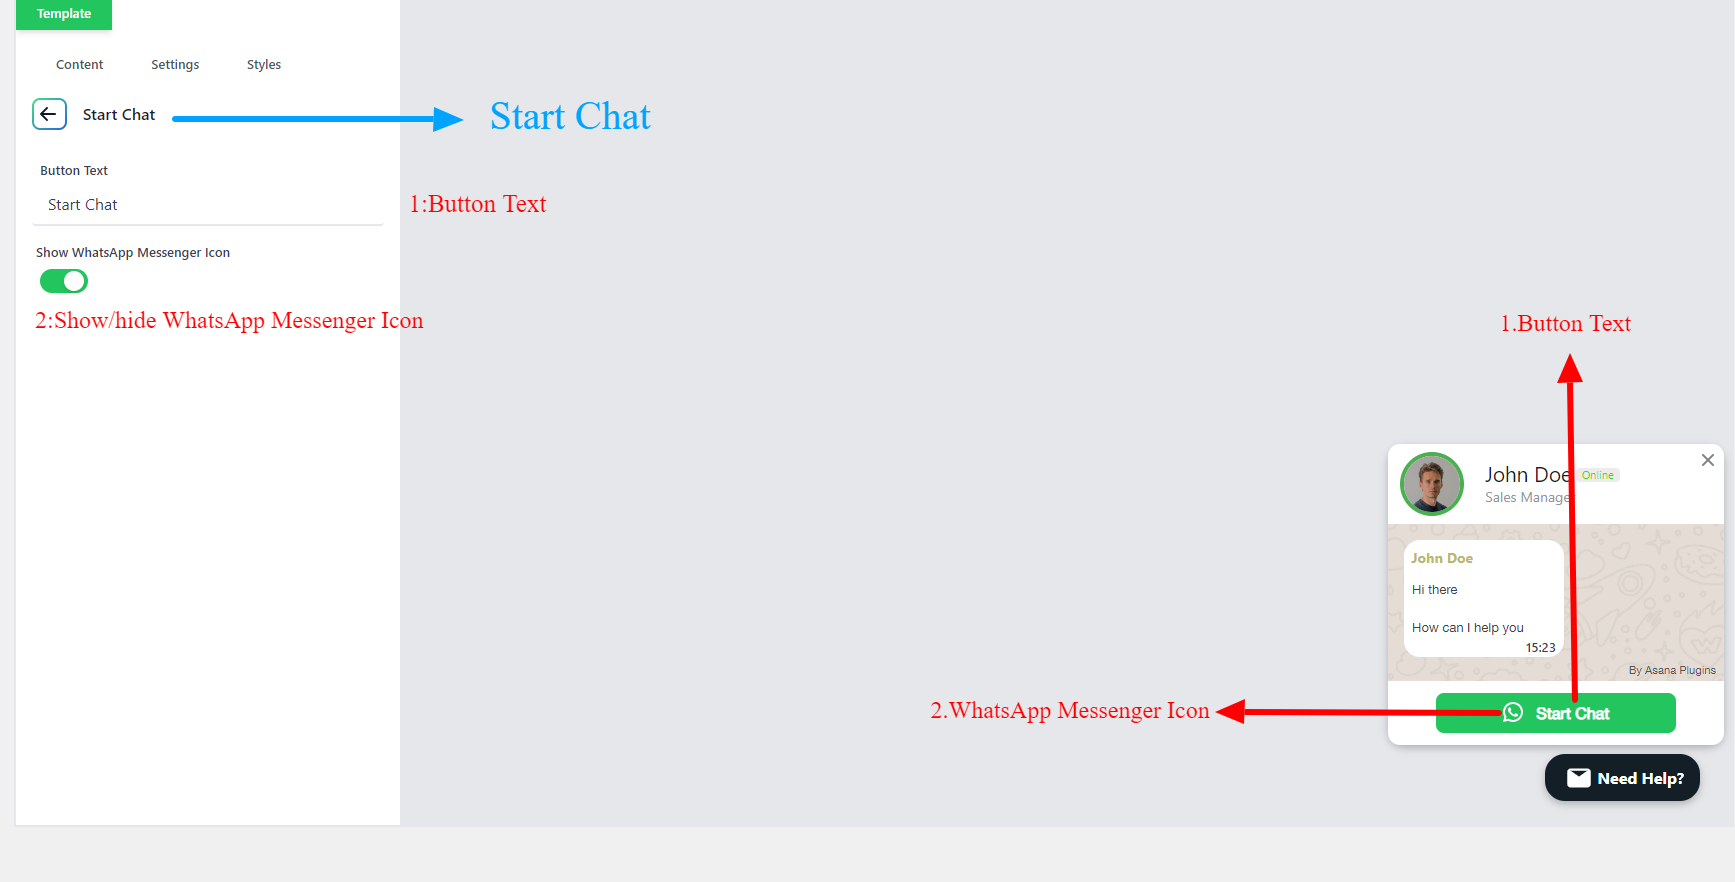 Change start chat button content